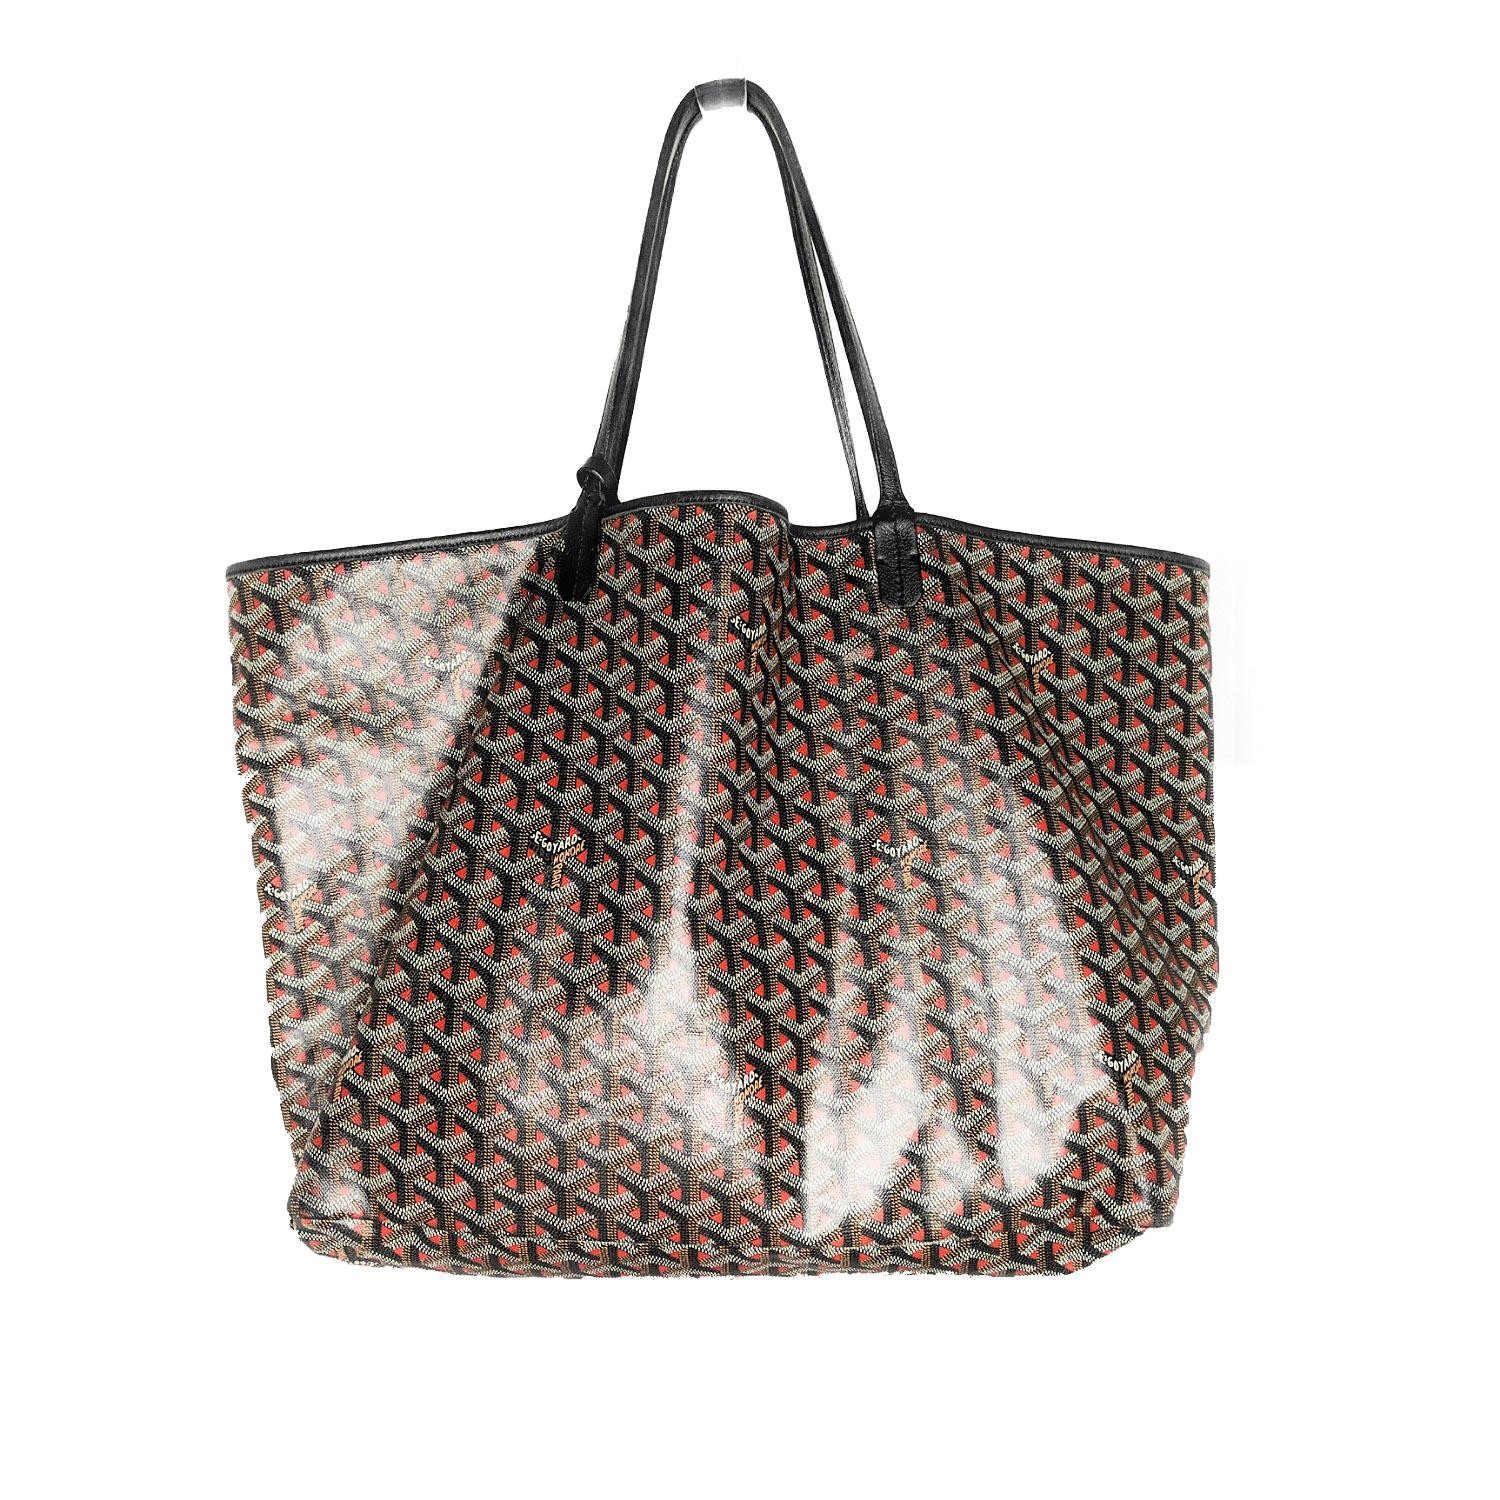 This special bag is the largest size of the line and features a classic relaxed tote structure. The bag is crafted from Goyard Paris special edition goyardine canvas with a unique background color that gives the illusion of seeing through the canvas